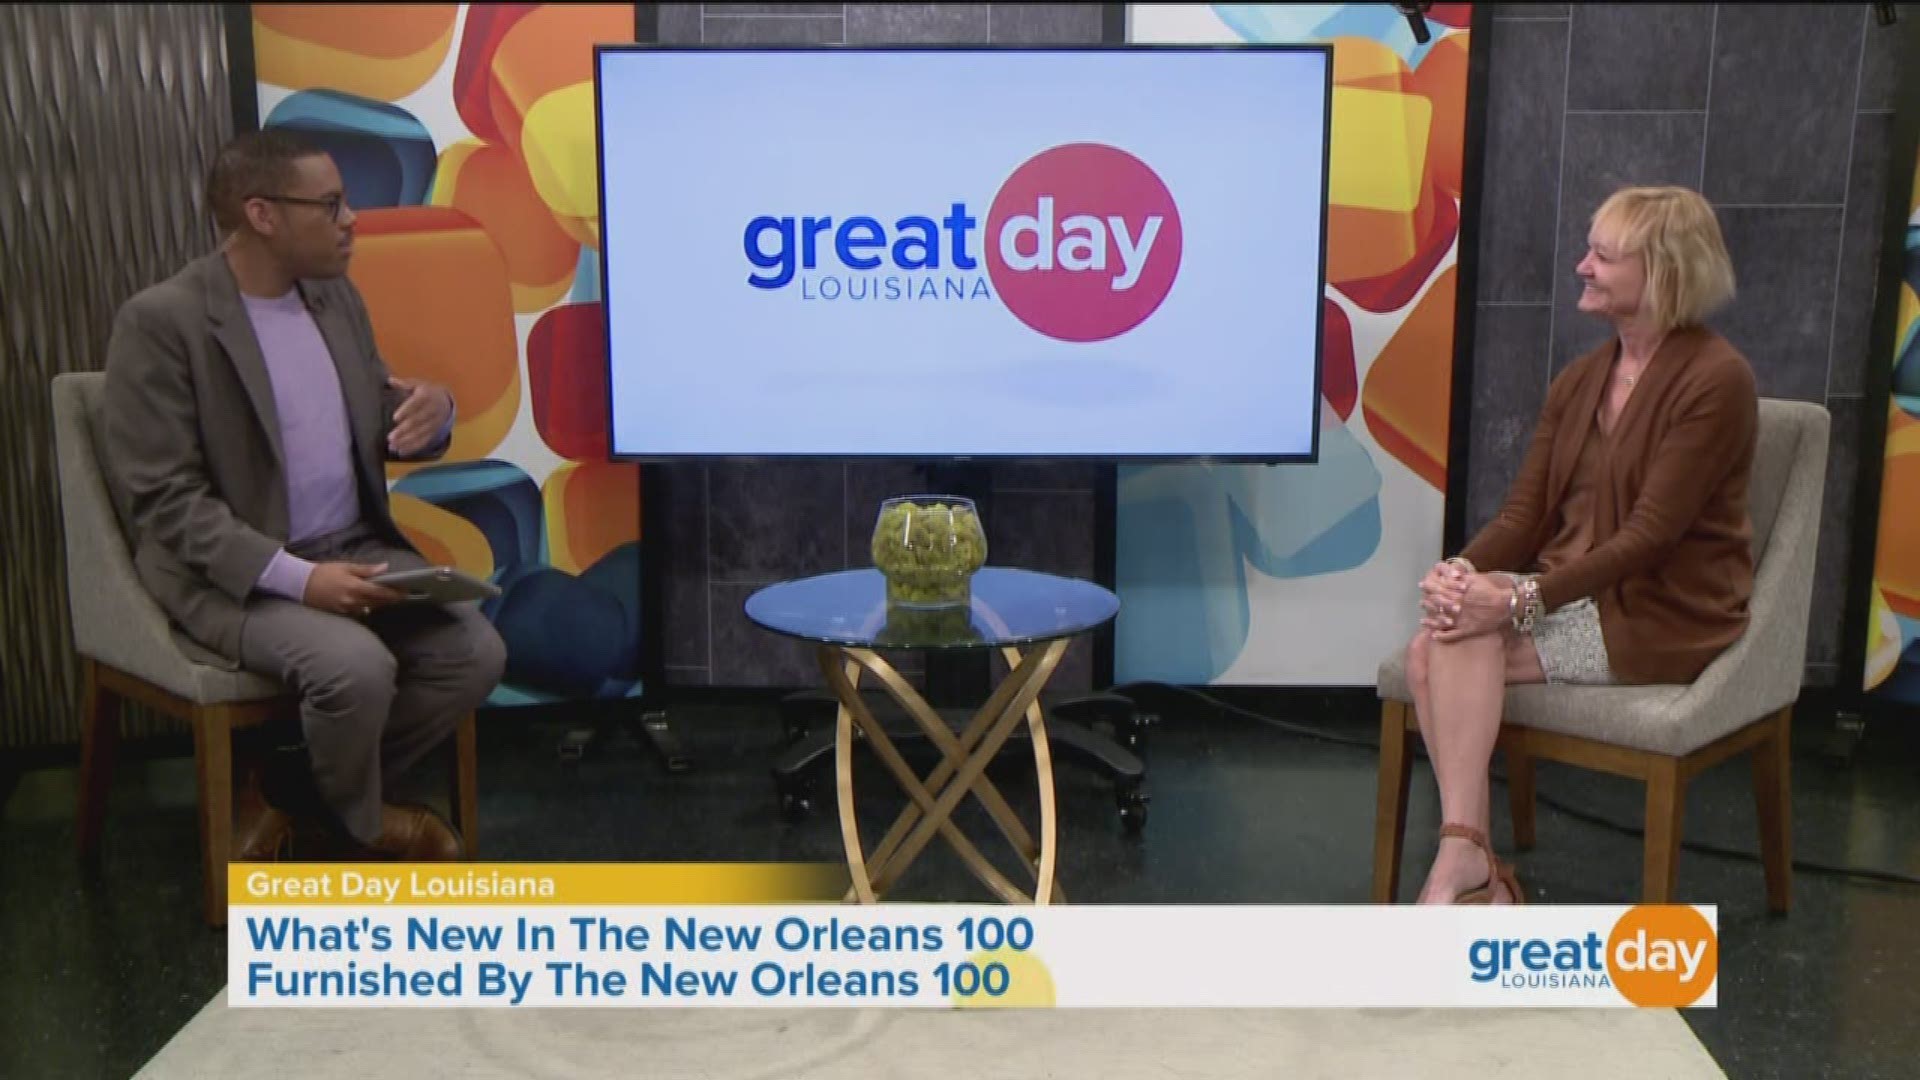 For more information about "The New Orleans 100," visit TheNewOrleans100.com.